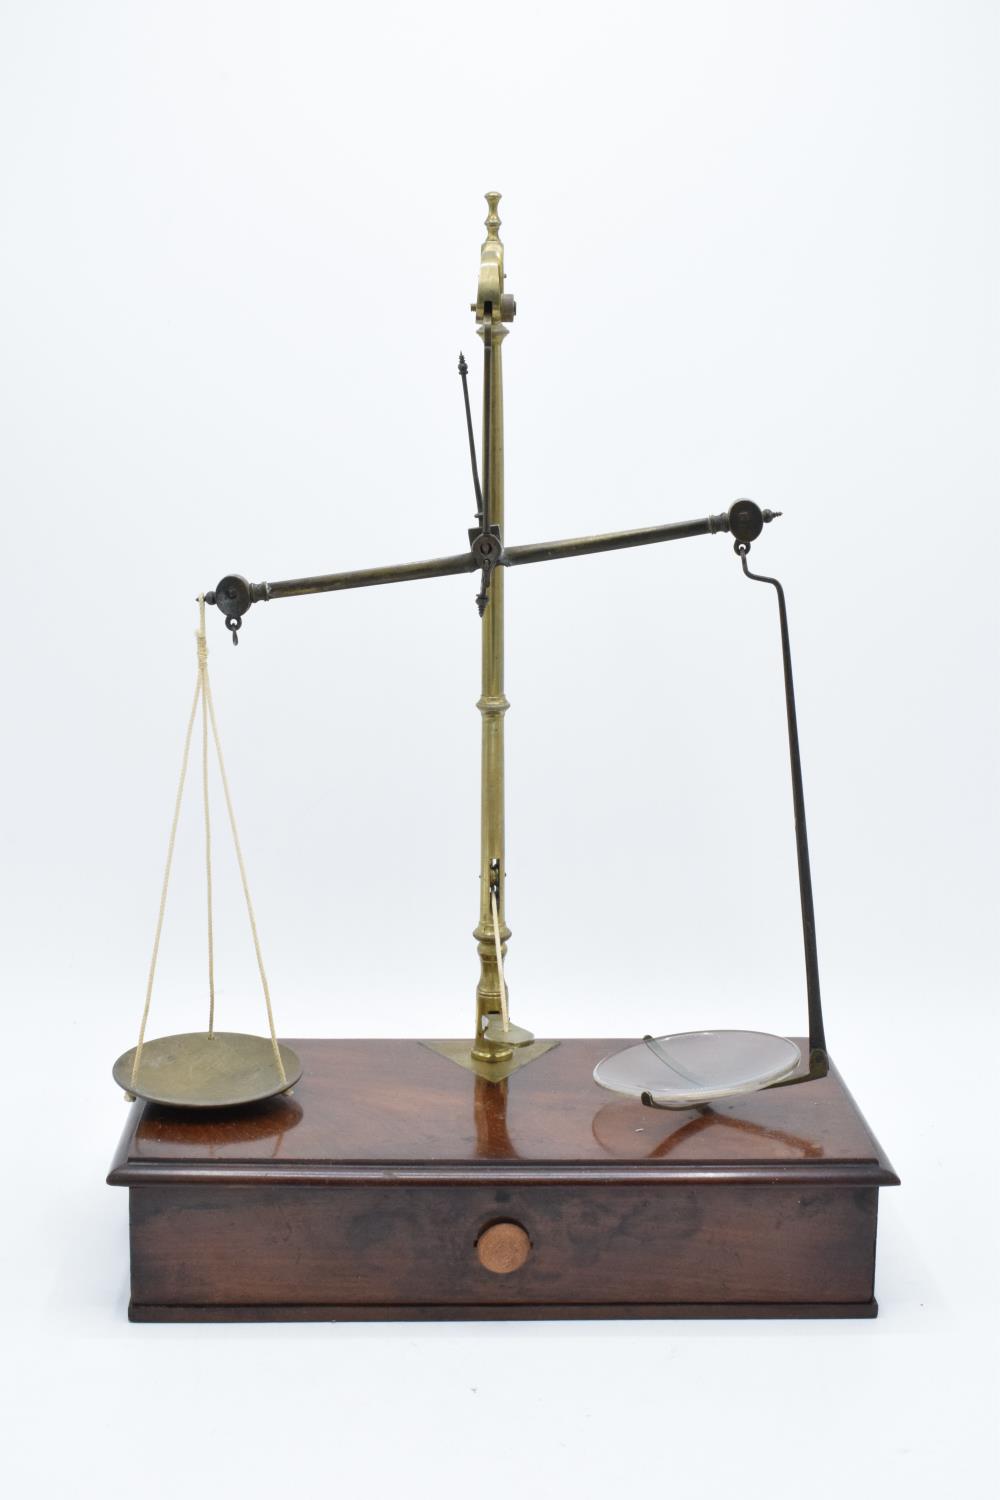 Early 20th century brass scales mounted a wooden base with a pull out. They display well. Might